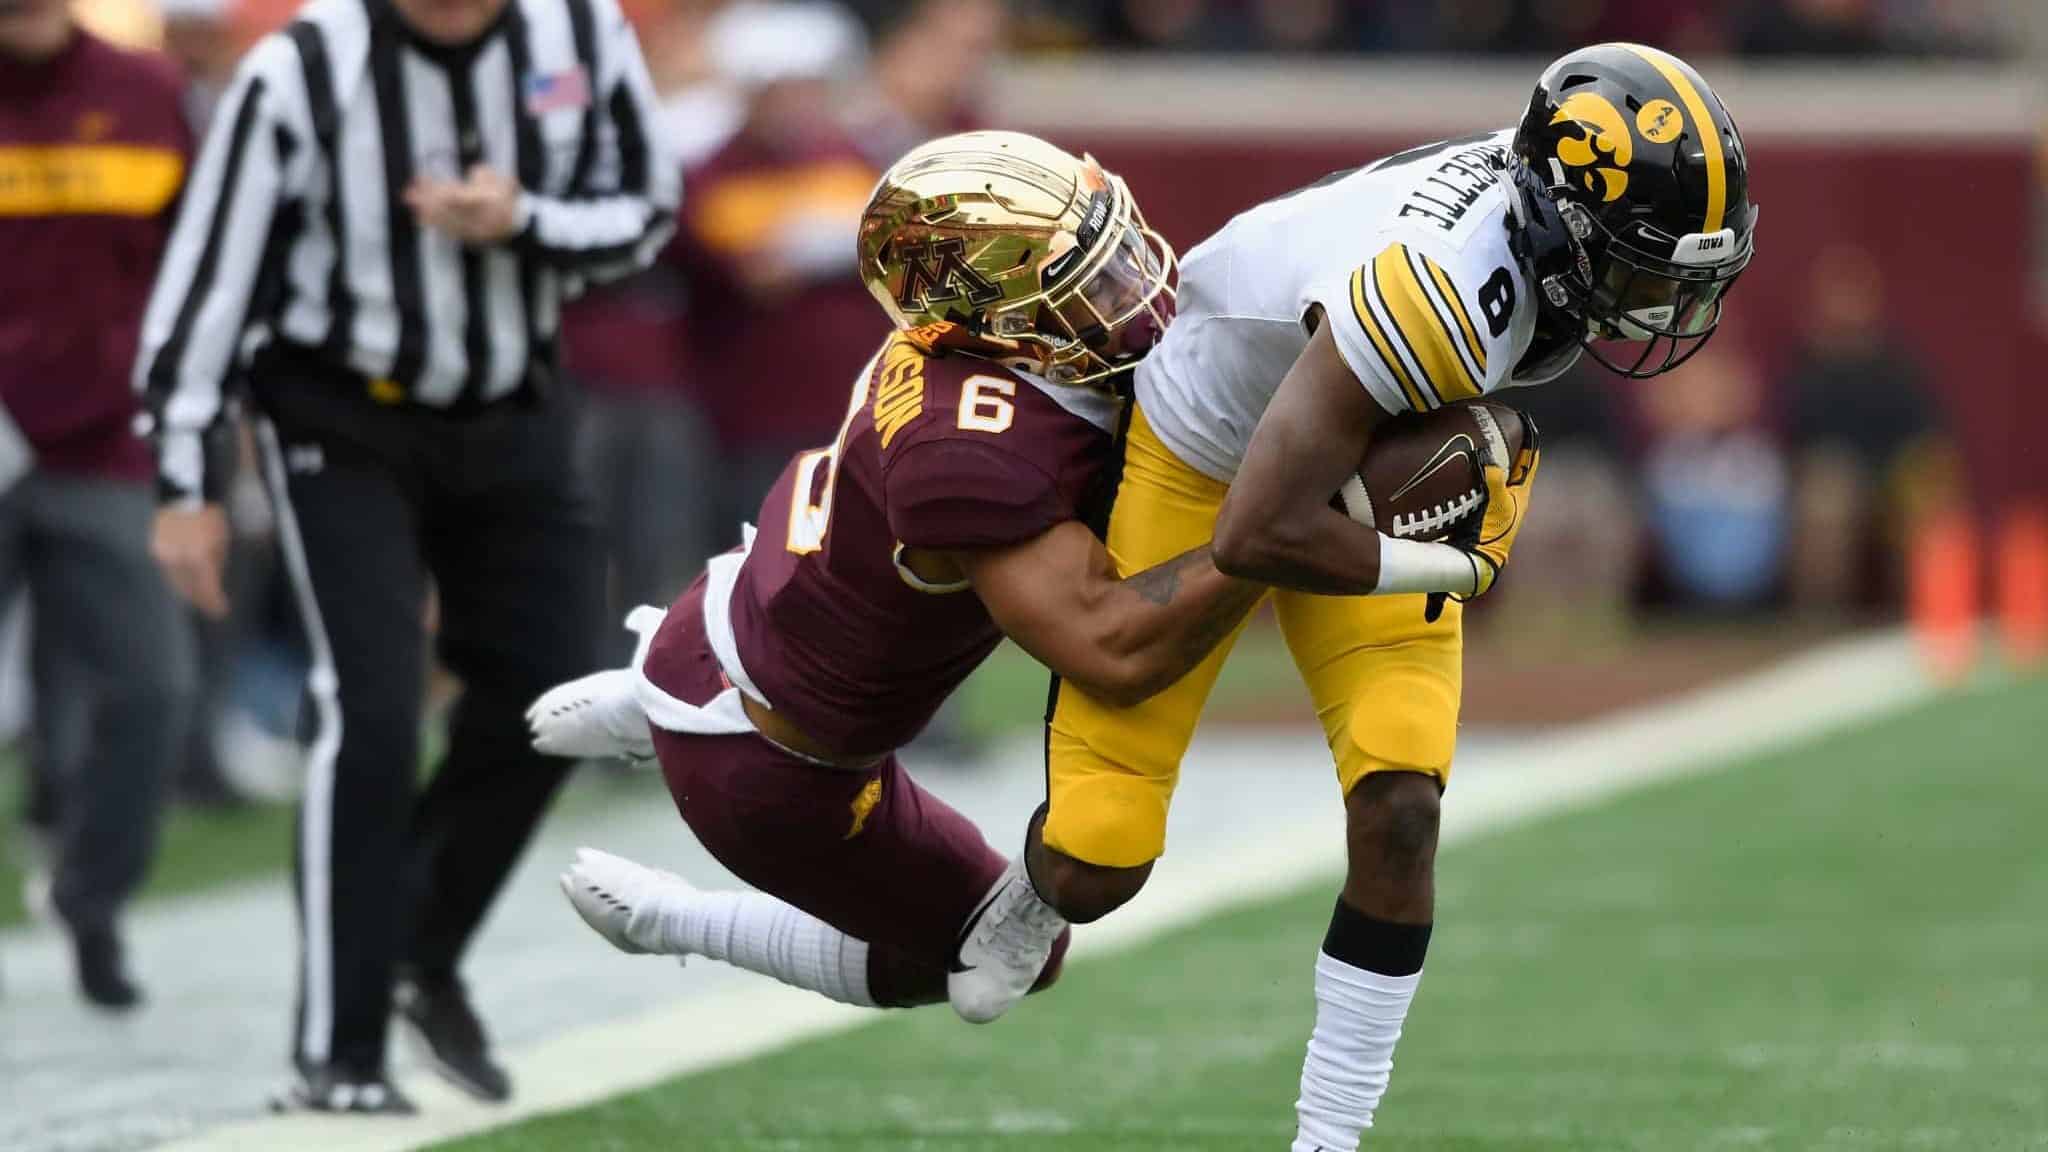 MINNEAPOLIS, MN - OCTOBER 06: Chris Williamson #6 of the Minnesota Golden Gophers pulls Ihmir Smith-Marsette #6 of the Iowa Hawkeyes out of bounds during the first quarter of the game on October 6, 2018 at TCF Bank Stadium in Minneapolis, Minnesota.